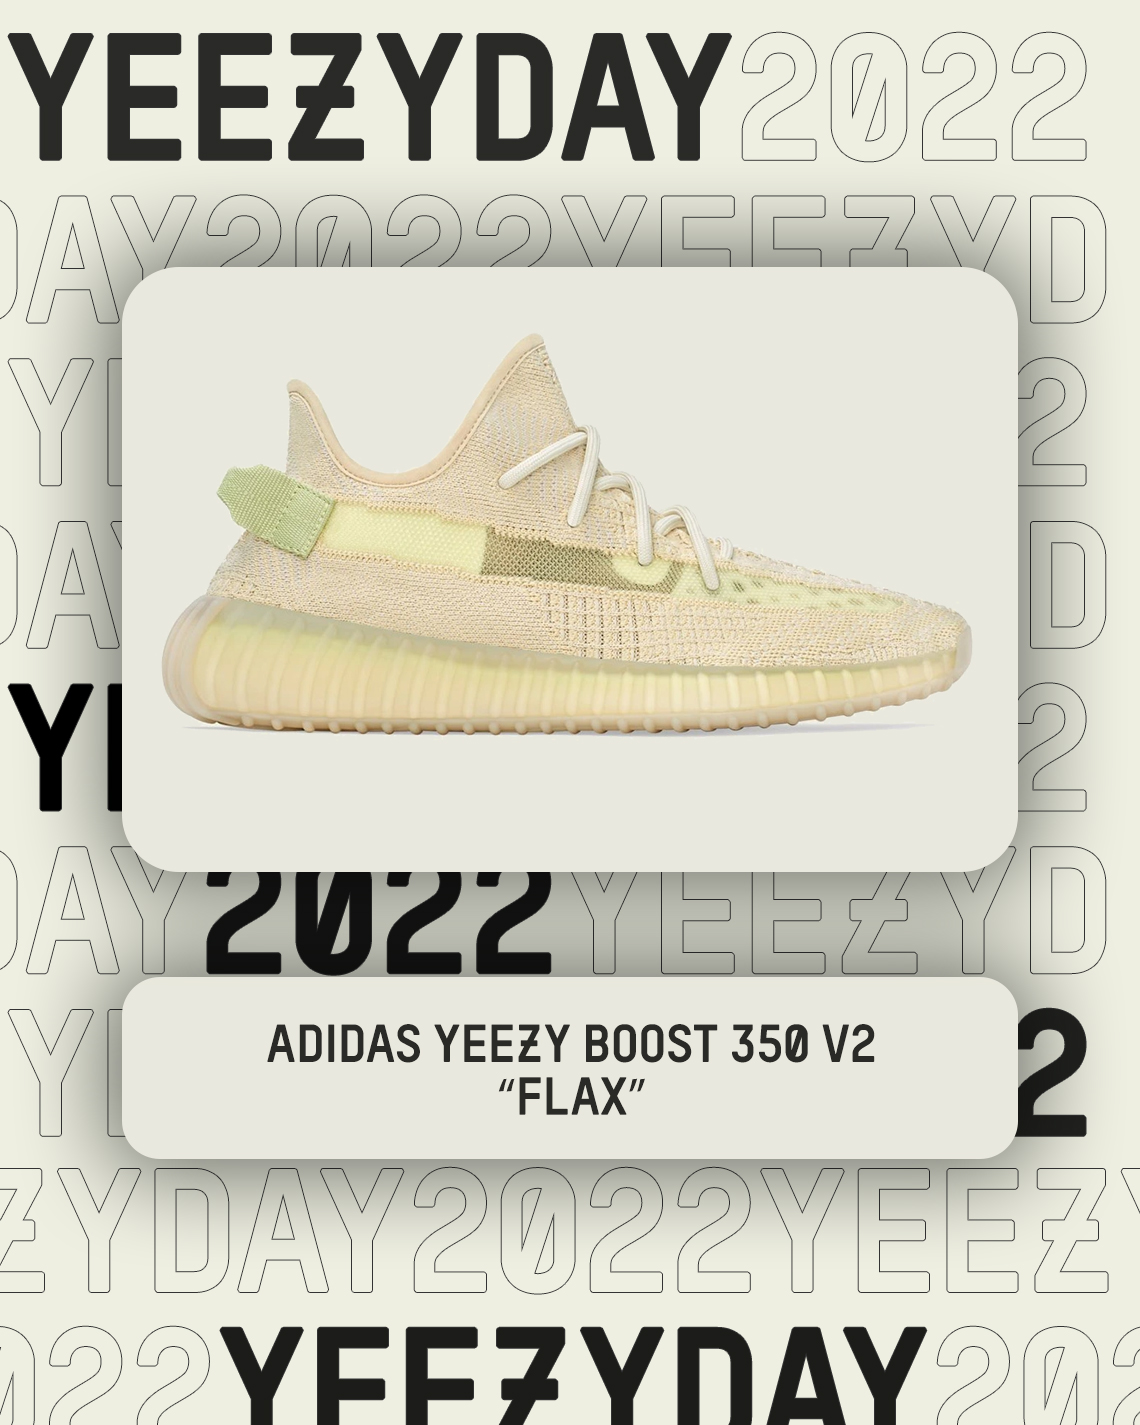 YEEZY DAY 2022 Releases – August 2nd & 3rd | SneakerNews.com